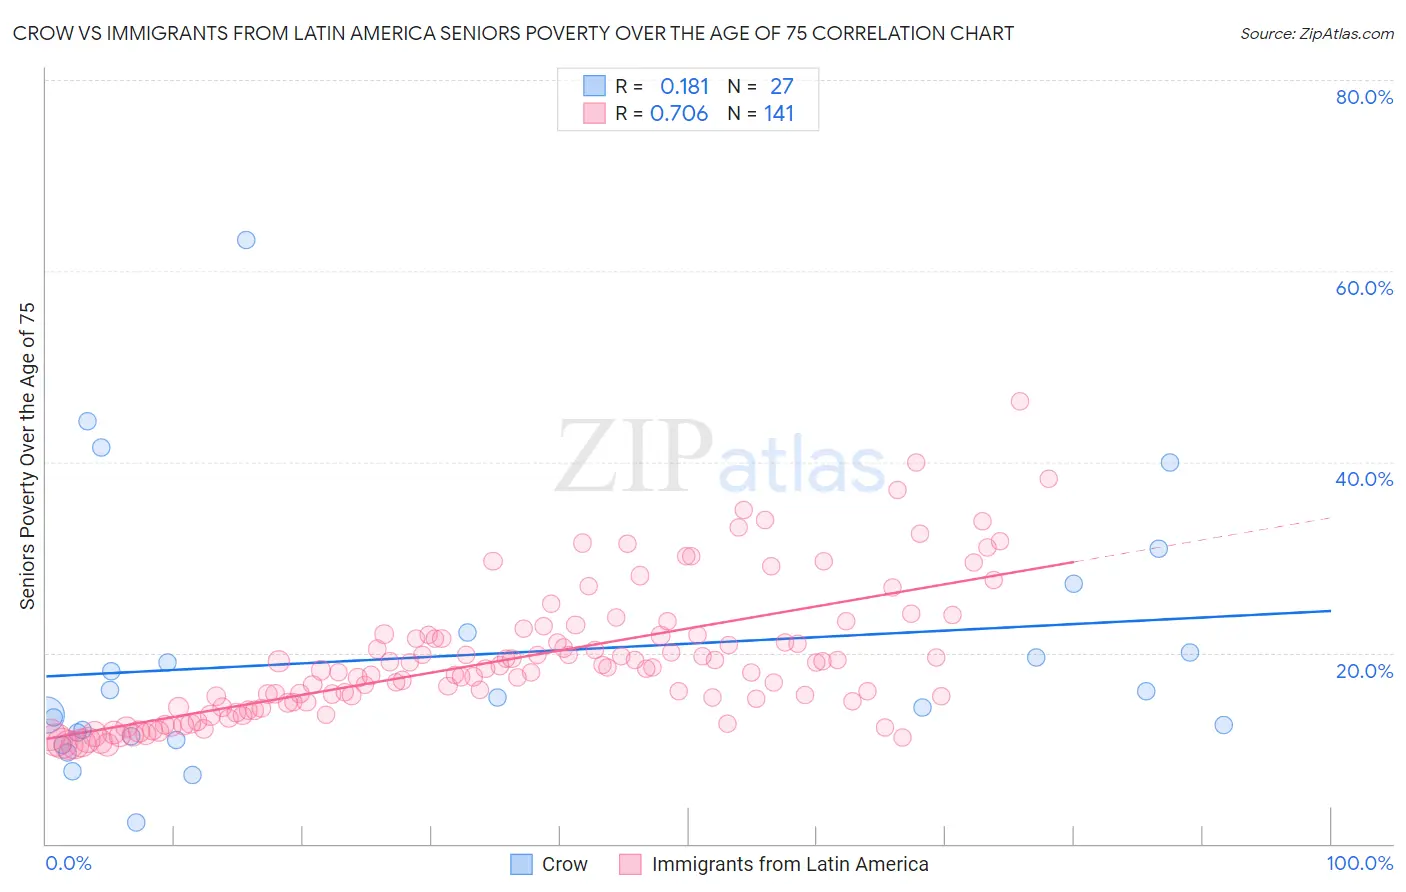 Crow vs Immigrants from Latin America Seniors Poverty Over the Age of 75